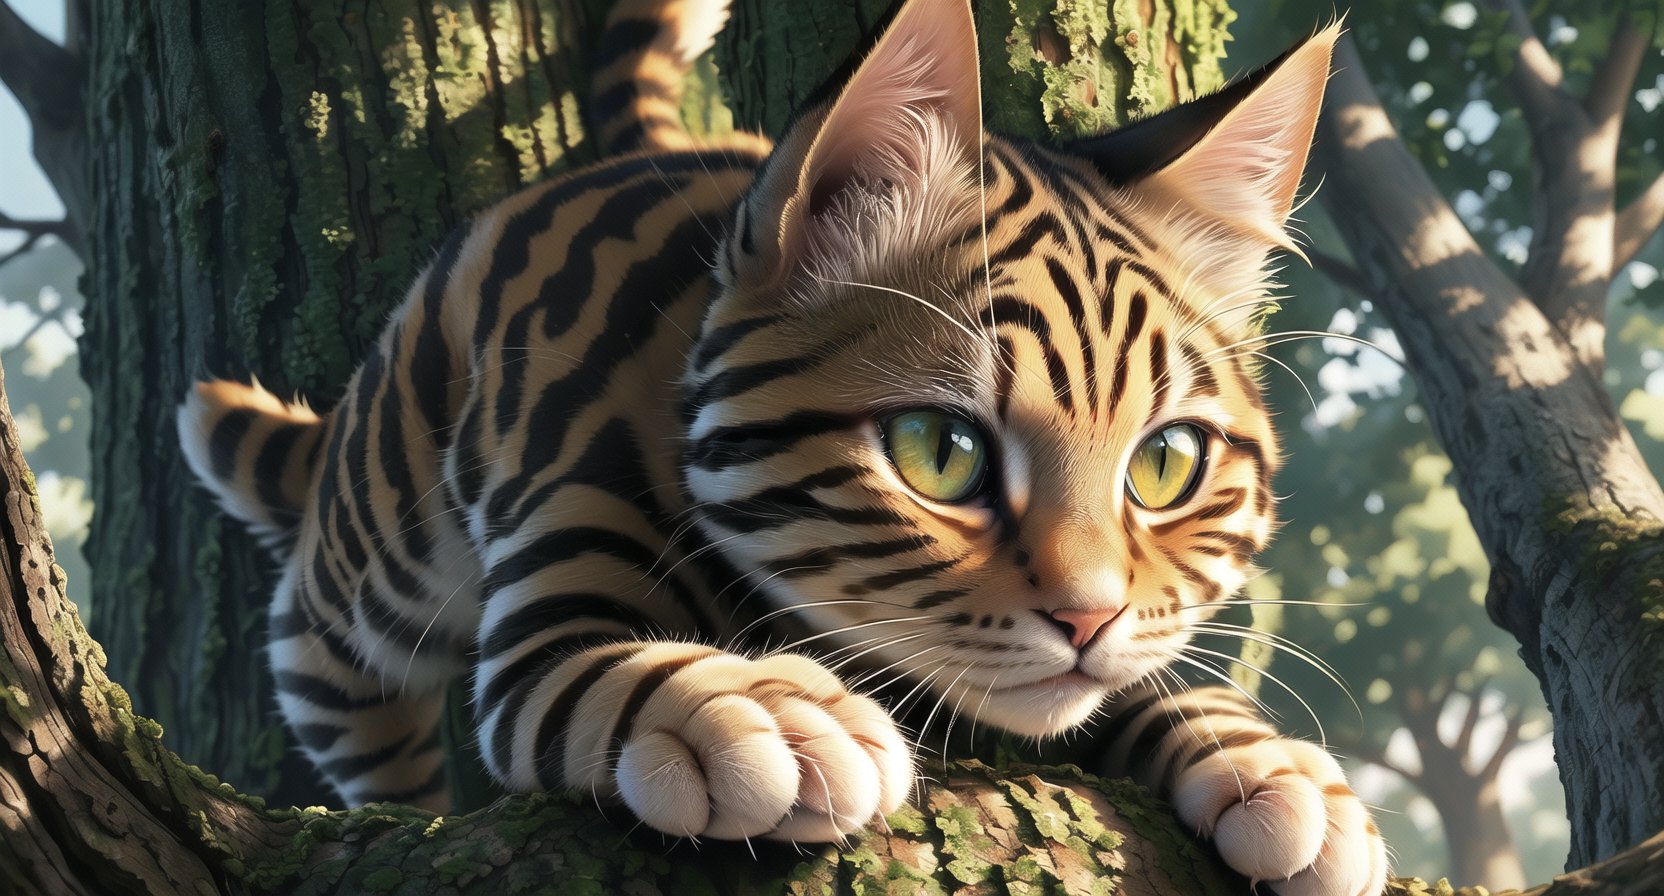 A close-up shot of a curious cat's face, its whiskers twitching with excitement as it claws its way up a sturdy tree trunk. The sunlight casts dappled shadows on the bark, highlighting the cat's agile paws and tail as it navigates the vertical ascent.